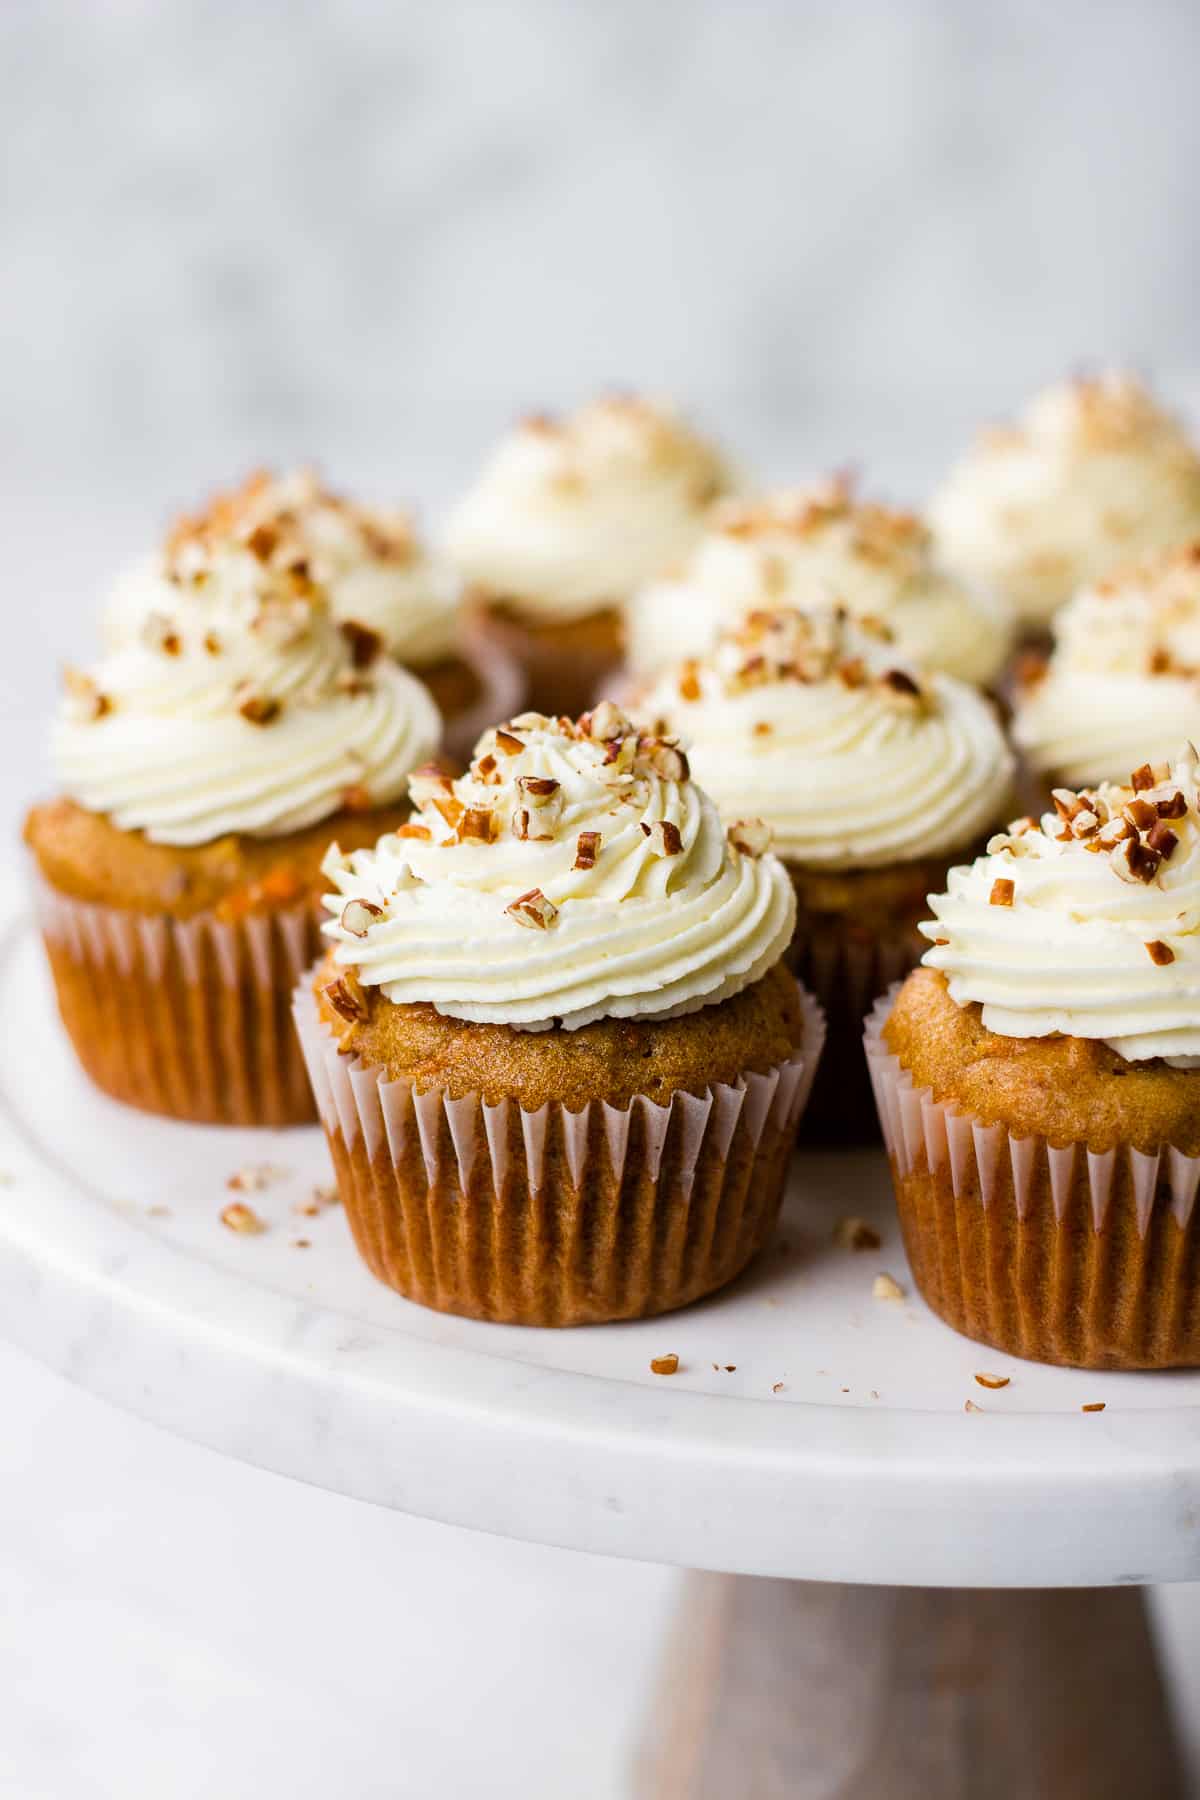 Carrot Cake Cupcakes topped with Cream Cheese Frosting on a serving platter.